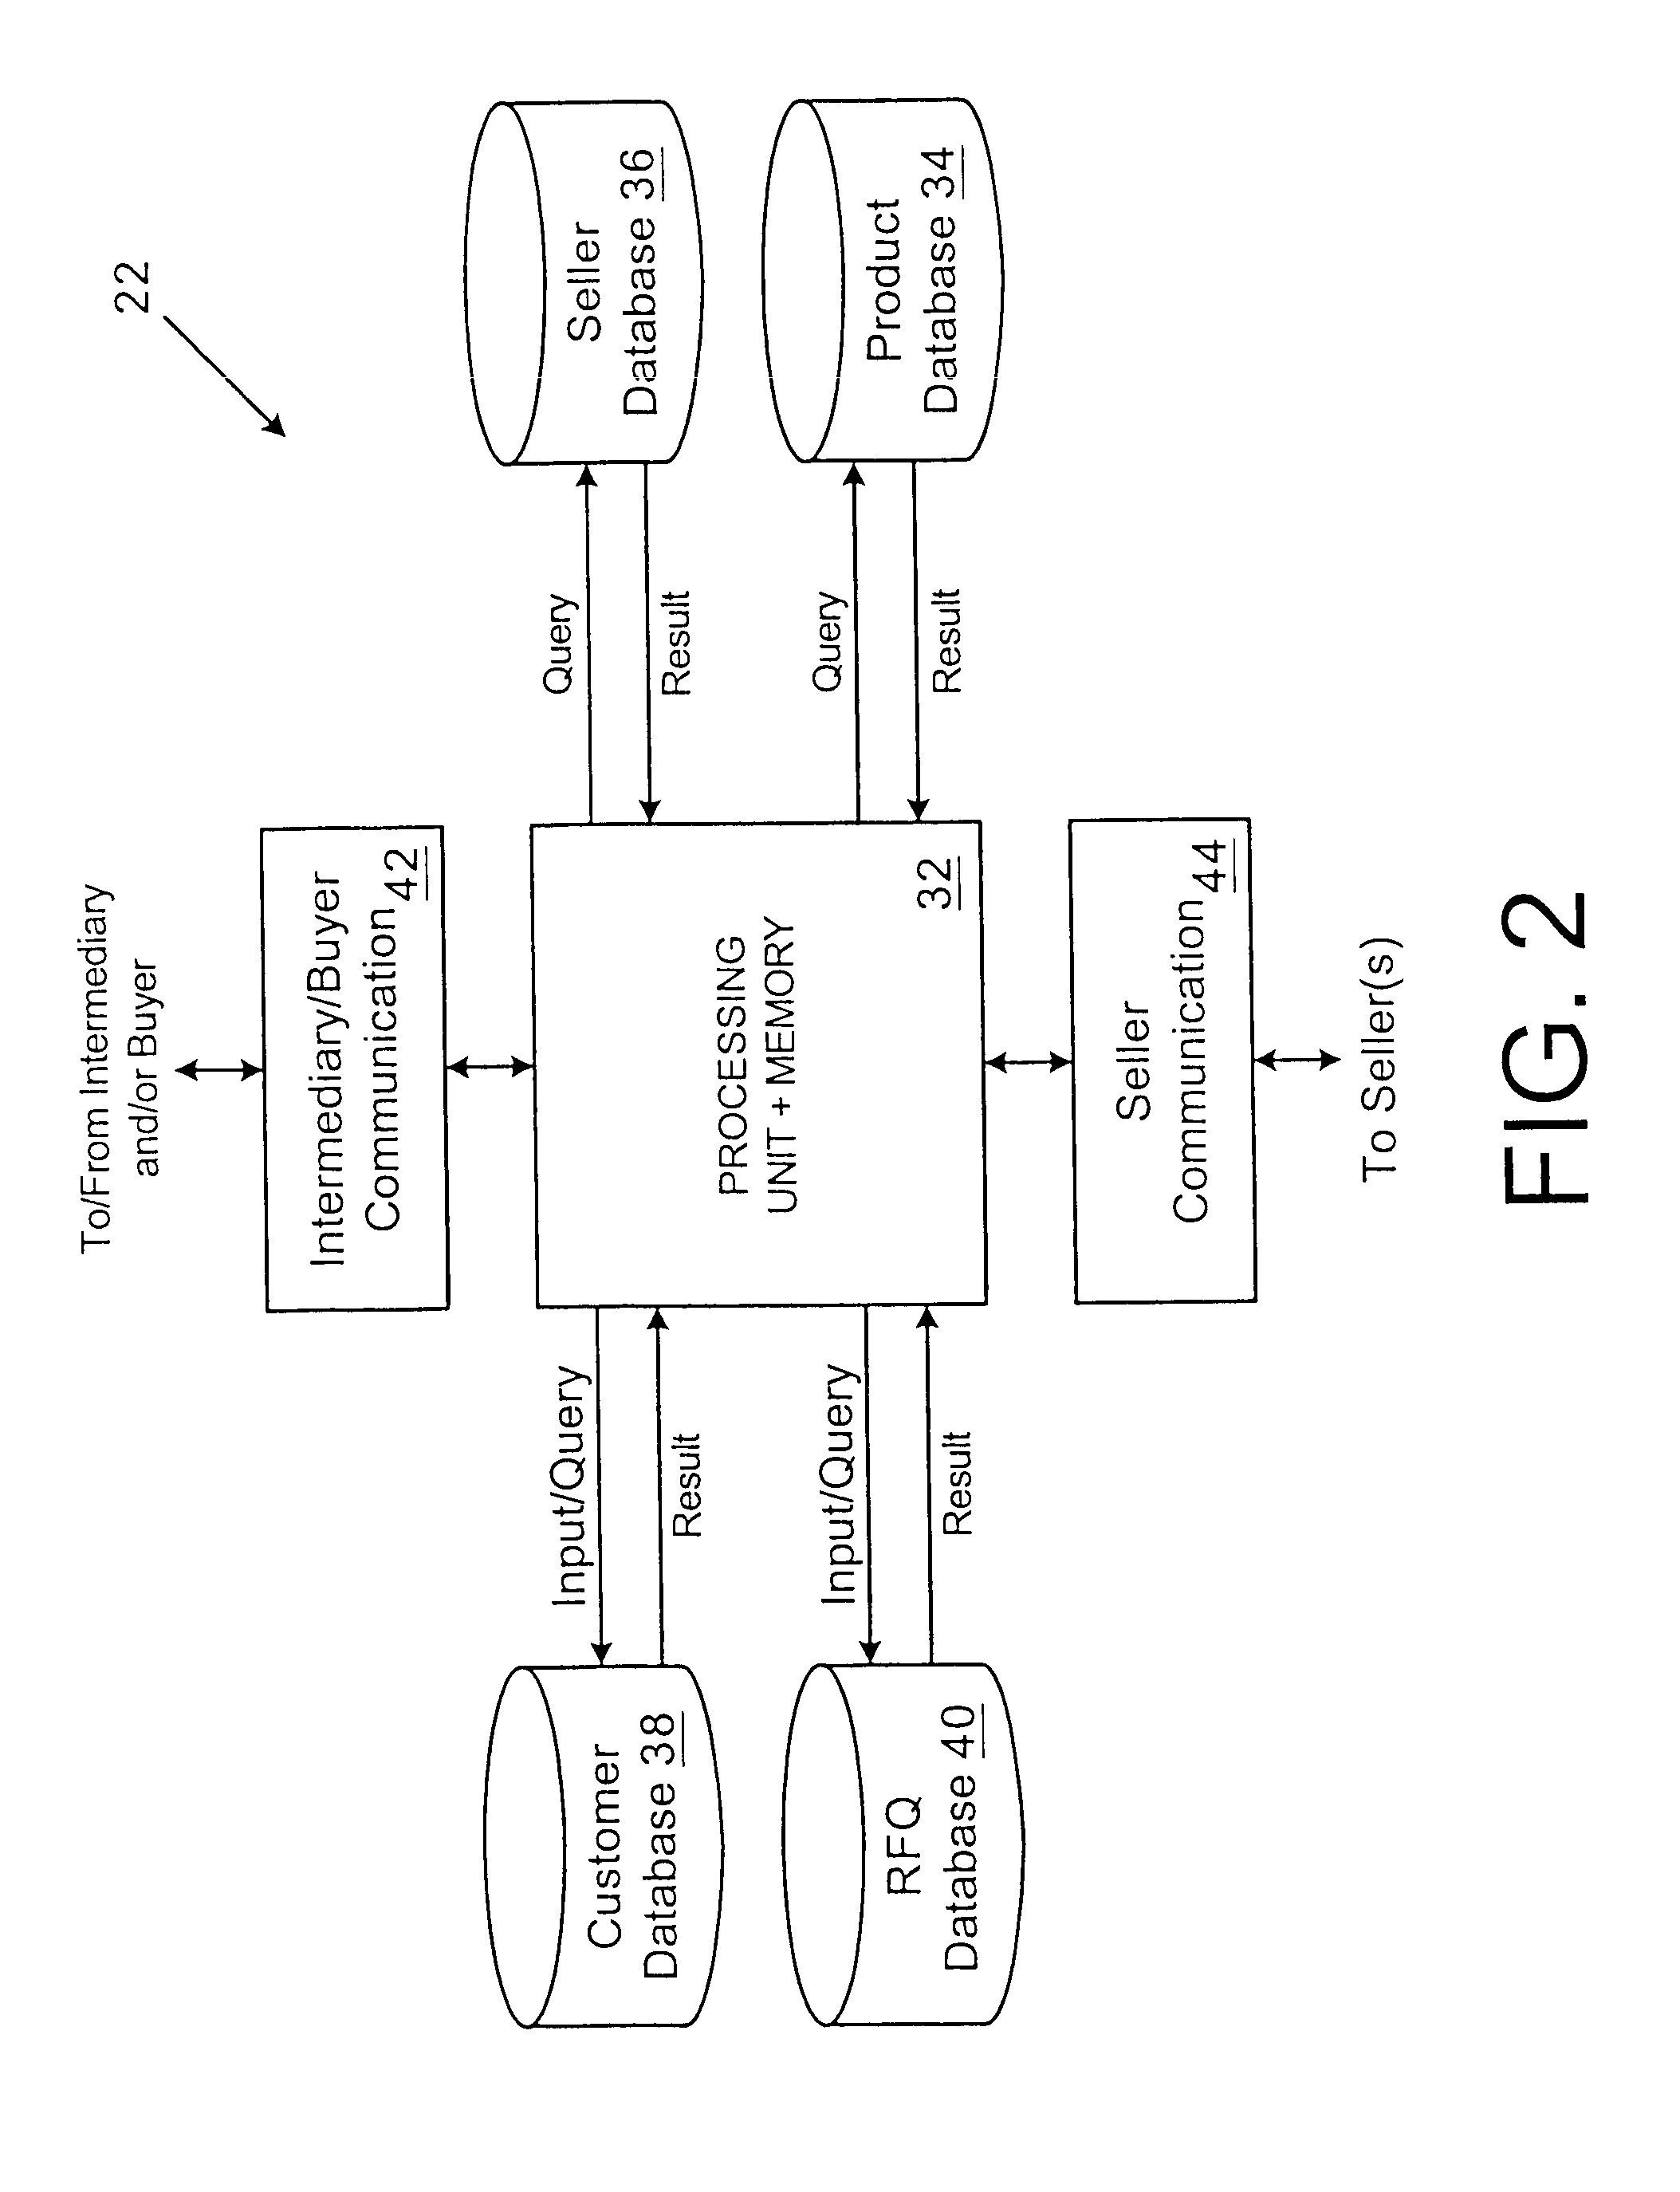 Apparatus and process facilitating customer-driven sales of products having multiple configurations